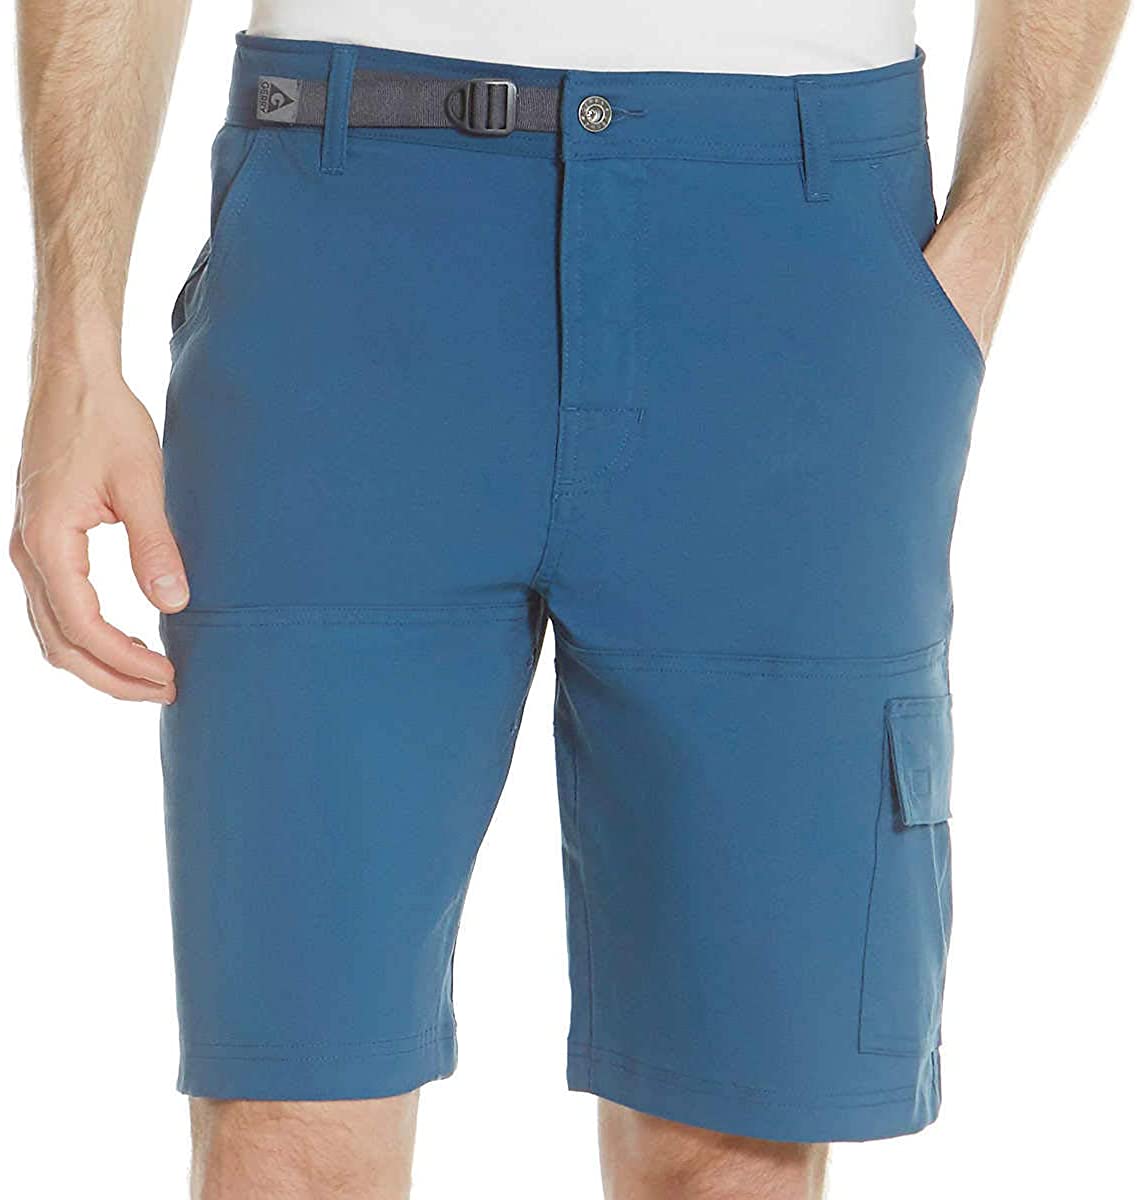 Gerry Mens Stretch Cargo Shorts 6 Pocket Venture Flat Front Woven Hiking Shorts for Men 